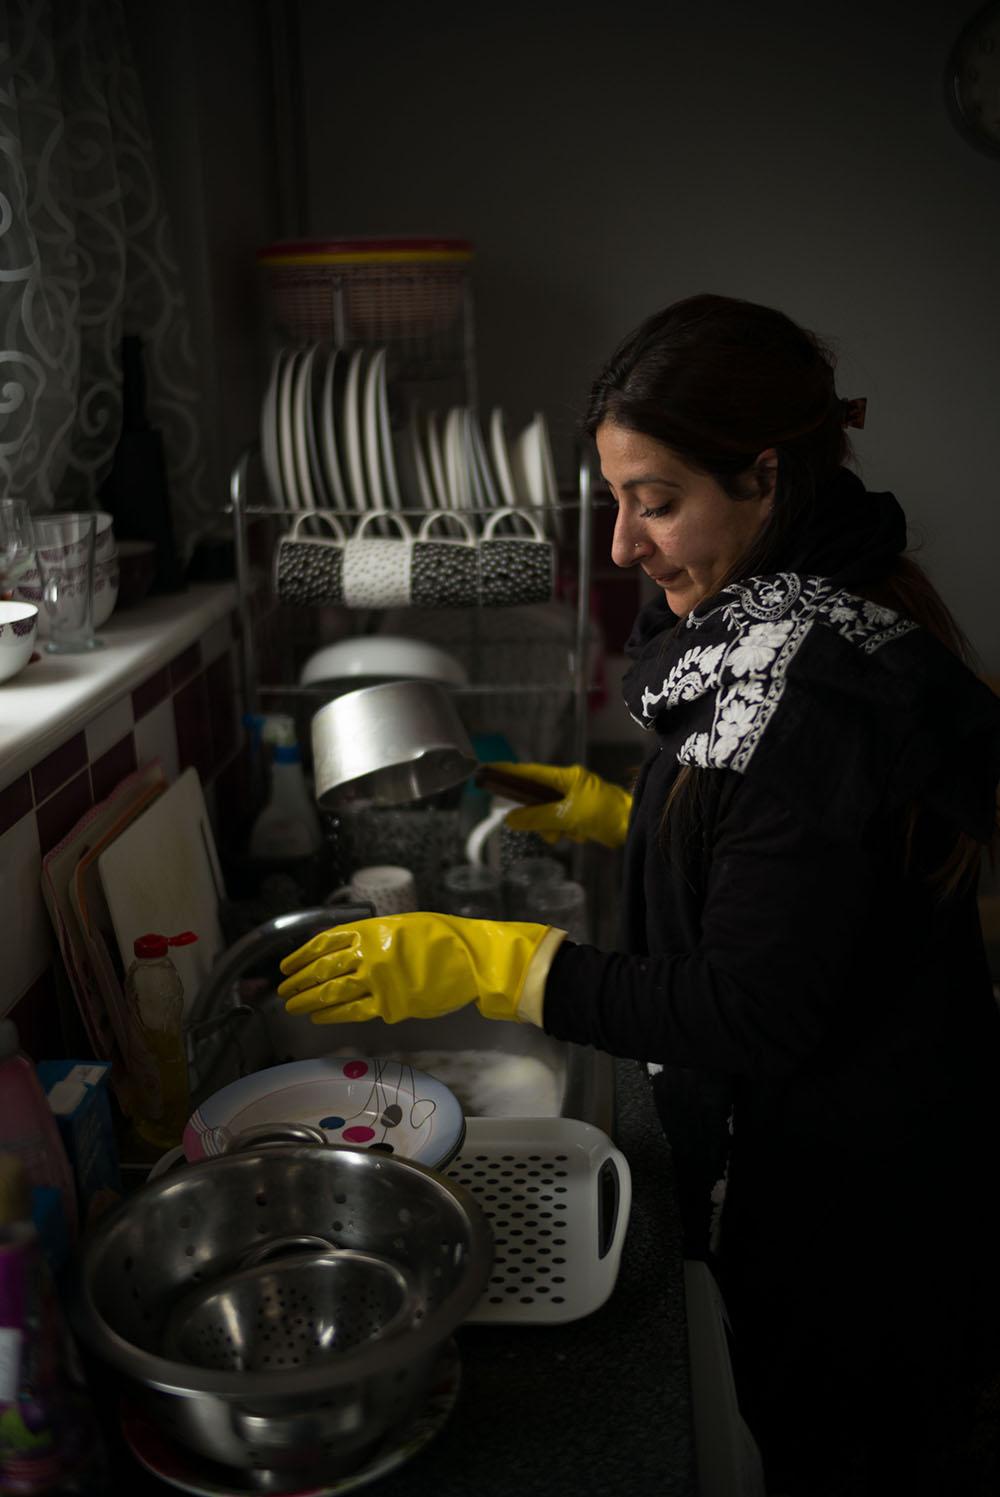 A lady wearing yellow washing up gloves washing pots and pans